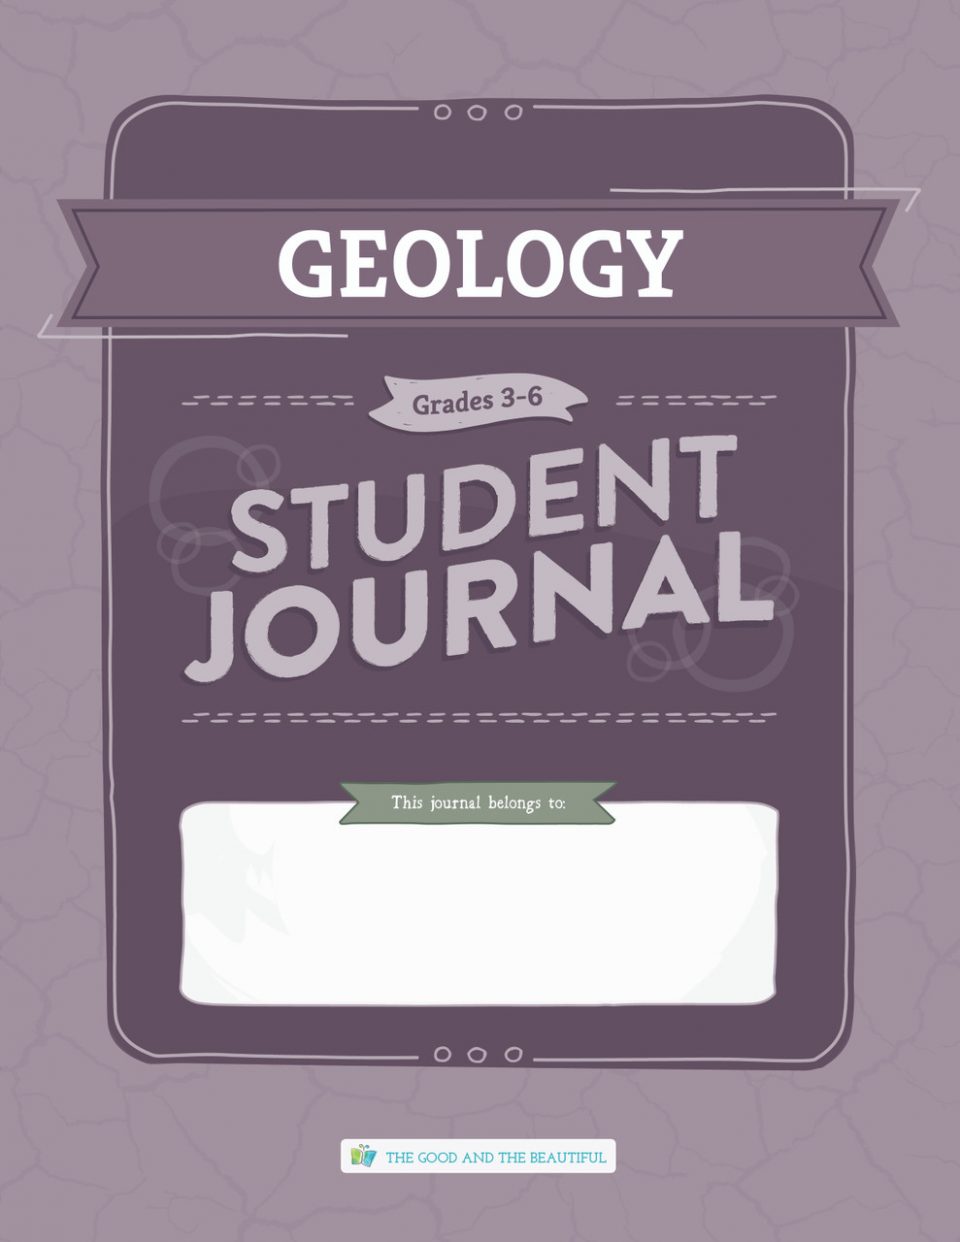 geology case study examples